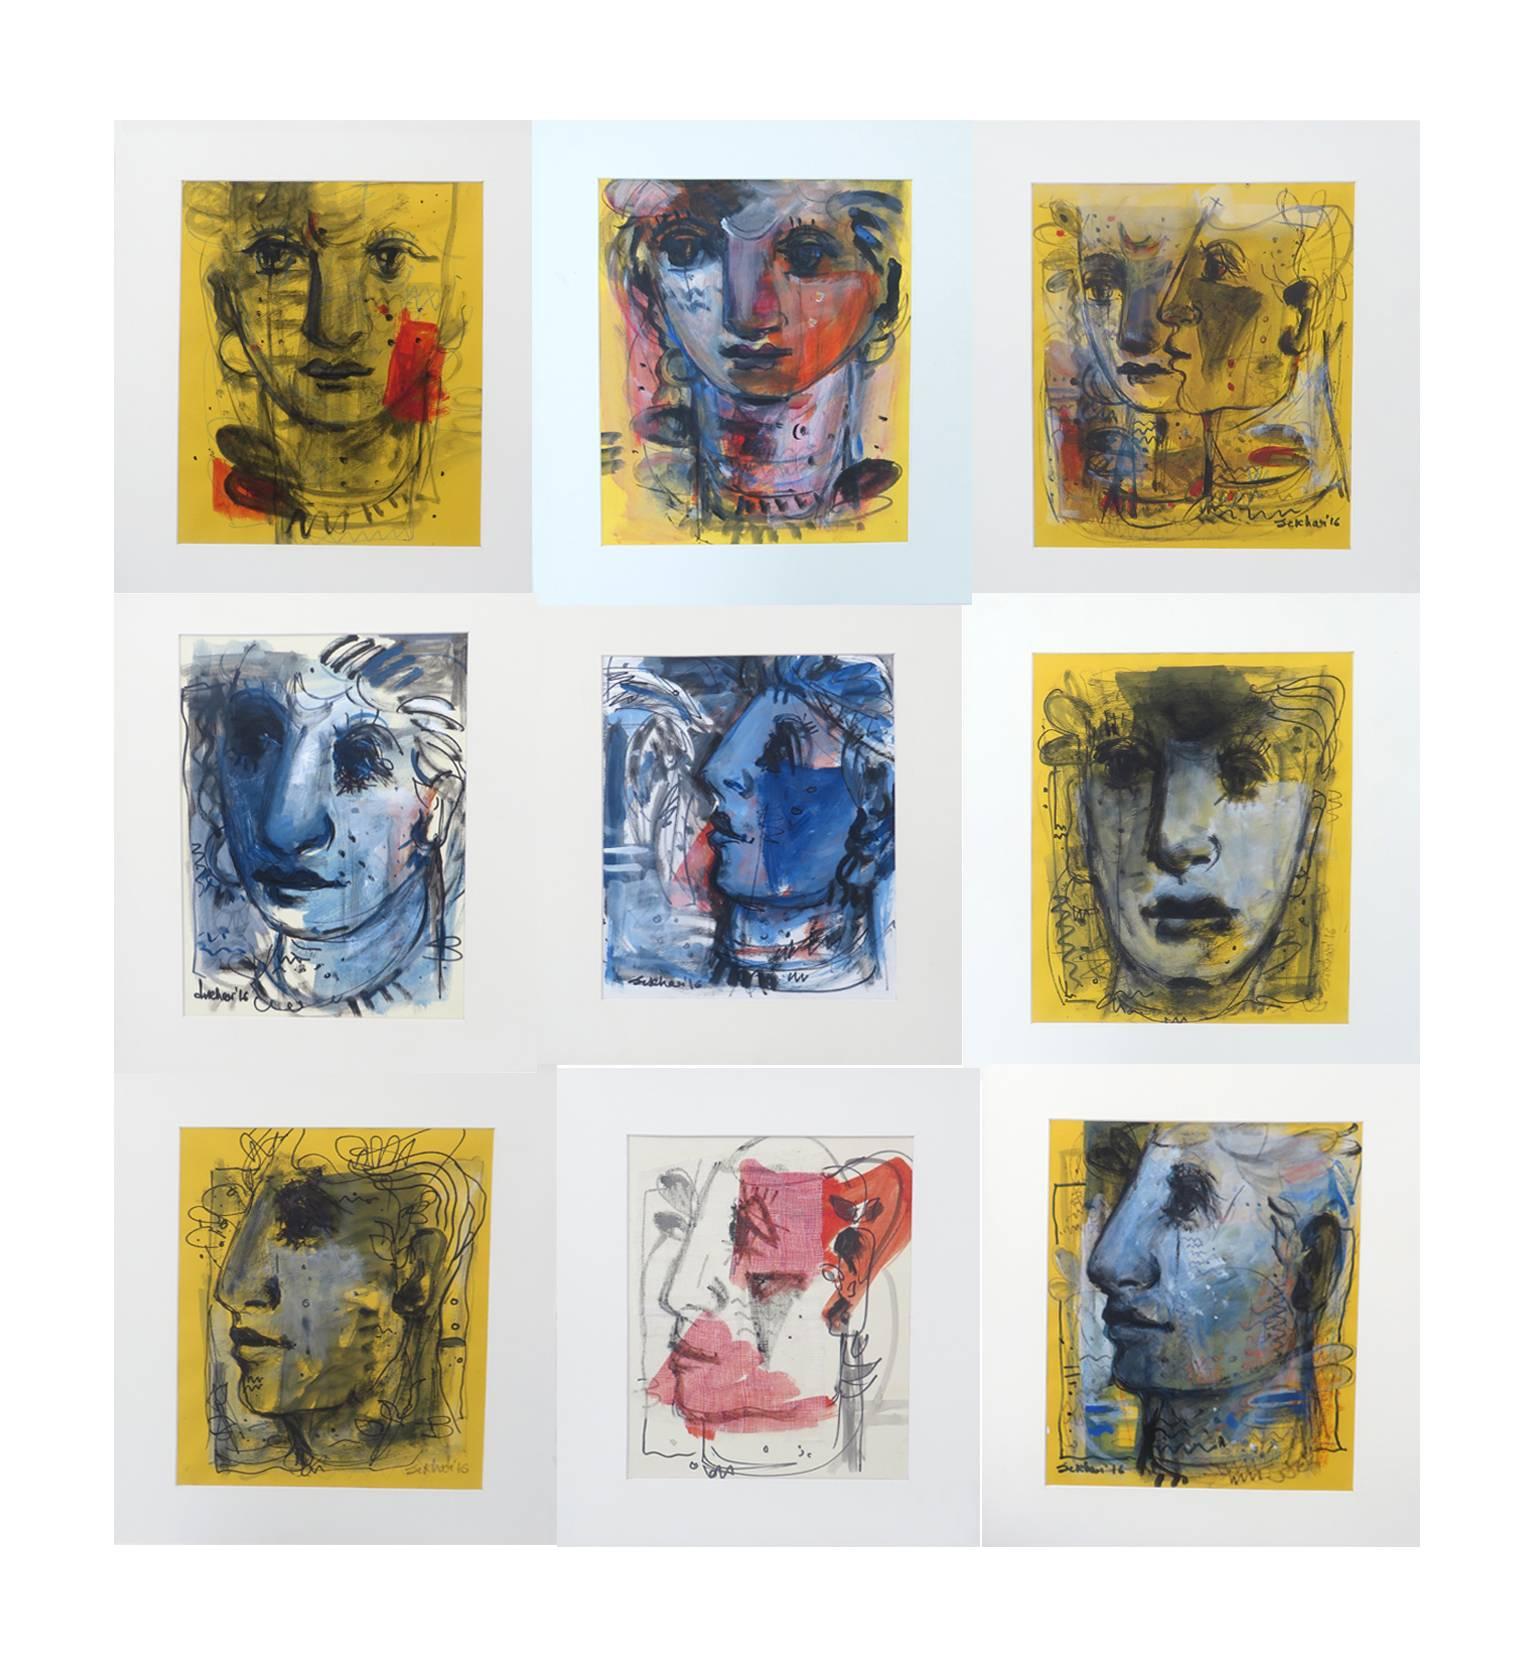 Faces, Moods, Expression, Mixed Media work by Contemporary Artist 